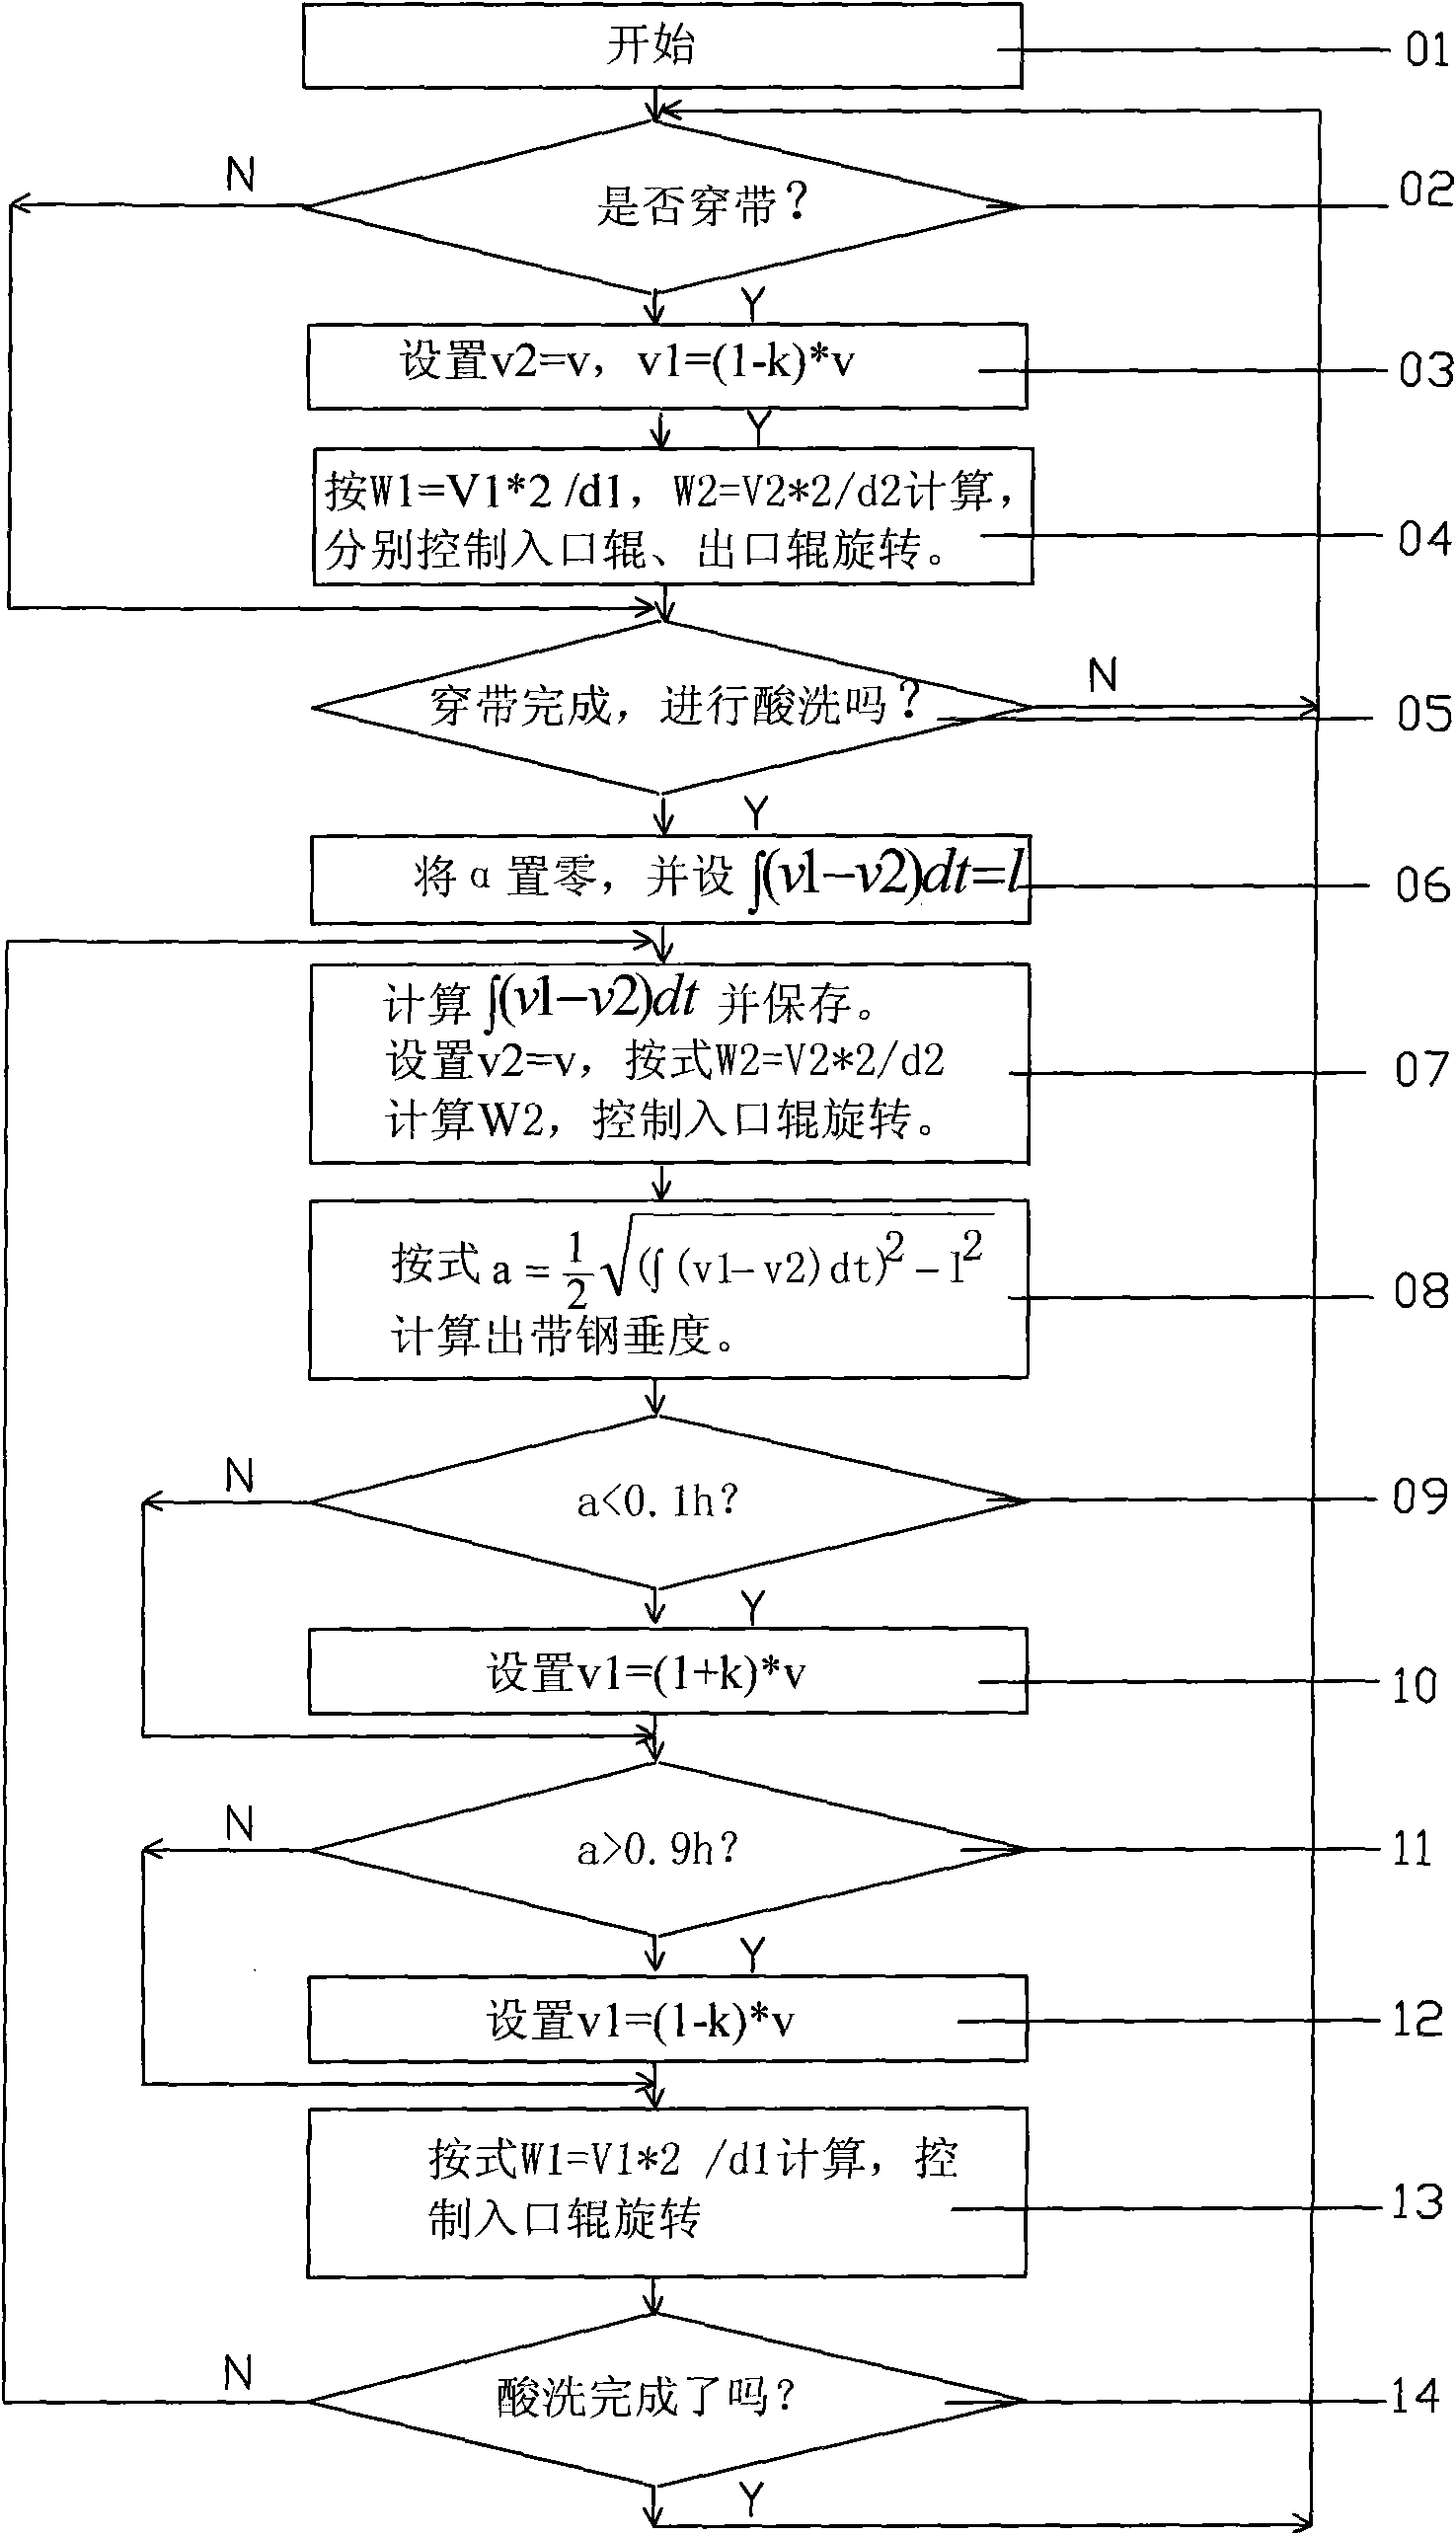 Method for controlling band steel sag for pickling bath